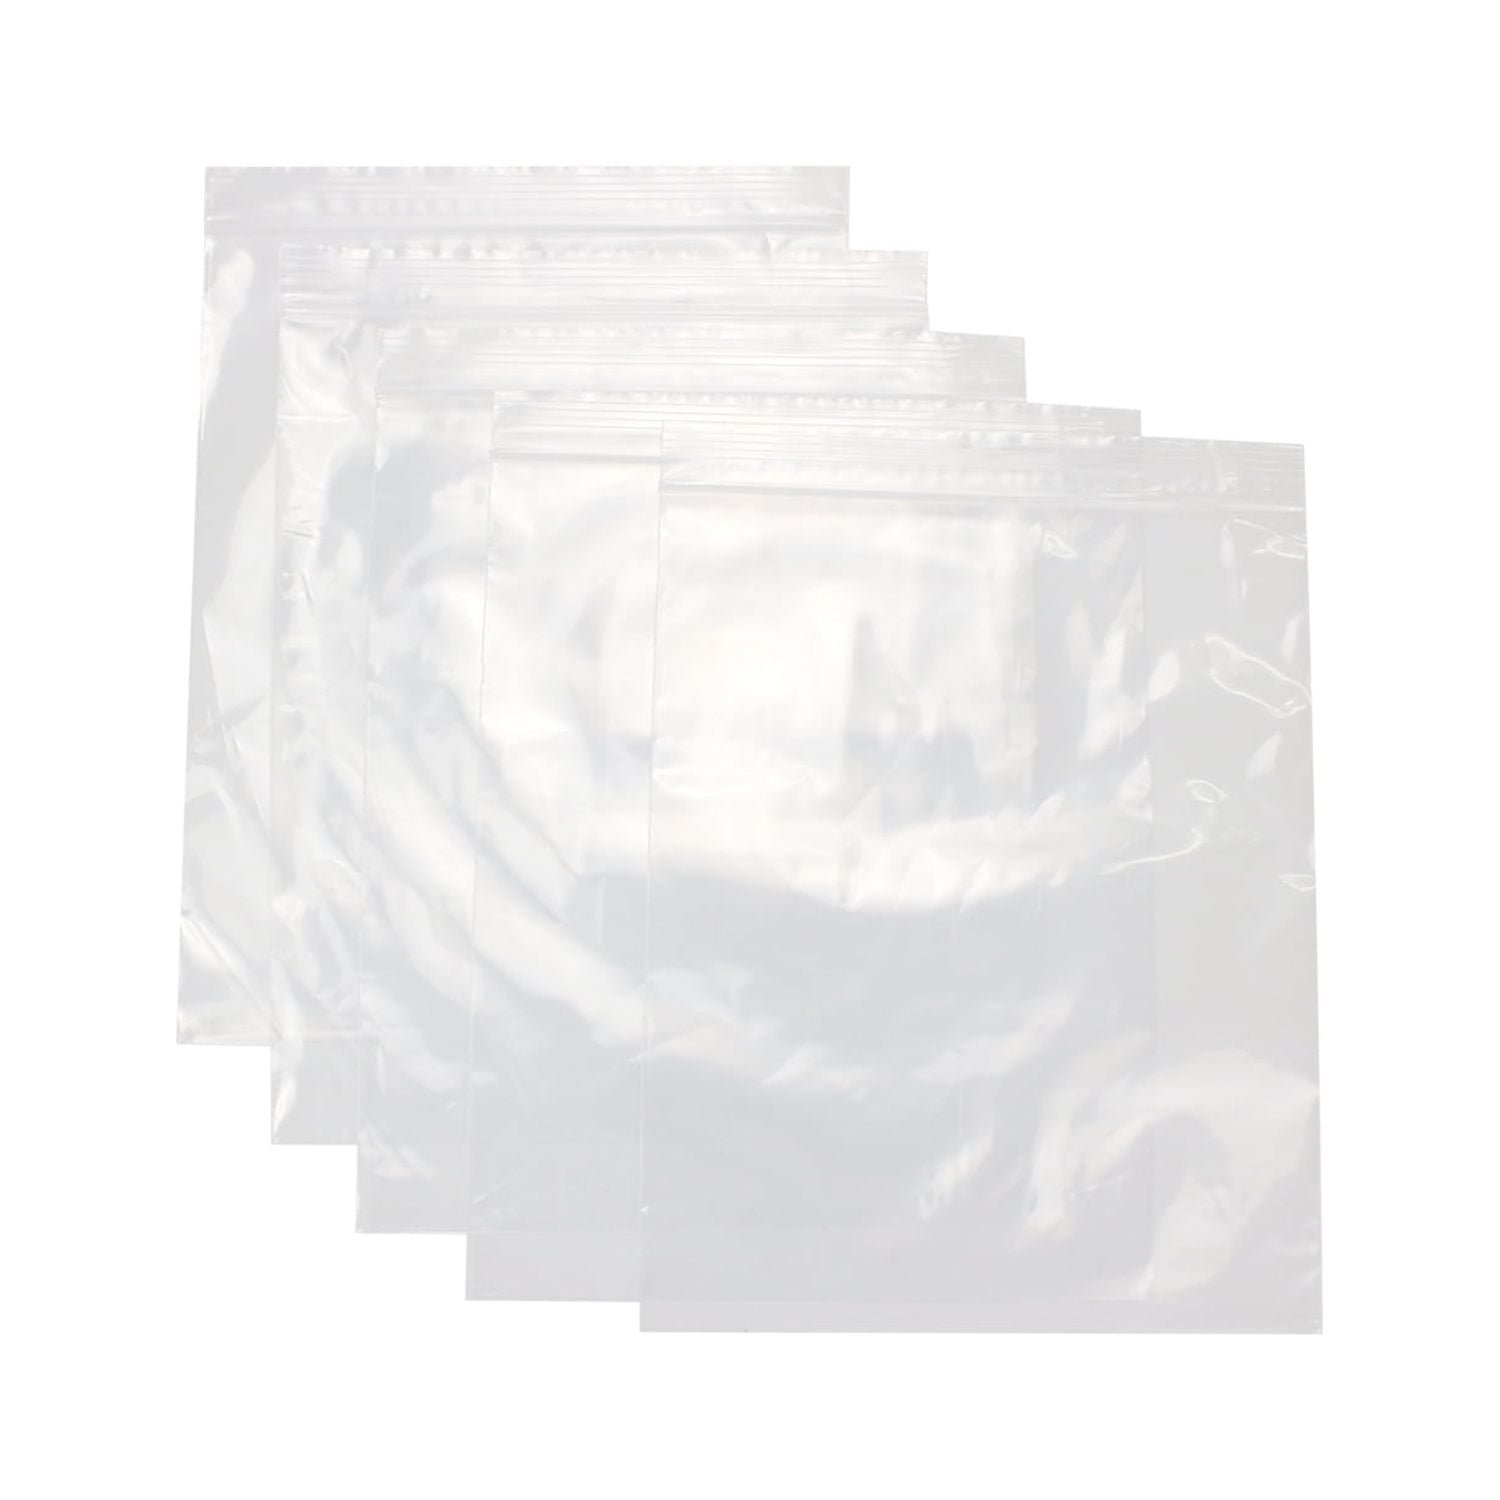 100ct, 10 x 12 Reclosable Zip Poly Bags 2 mil, BPA-Free, Clear, Durable, Packaging & Storing